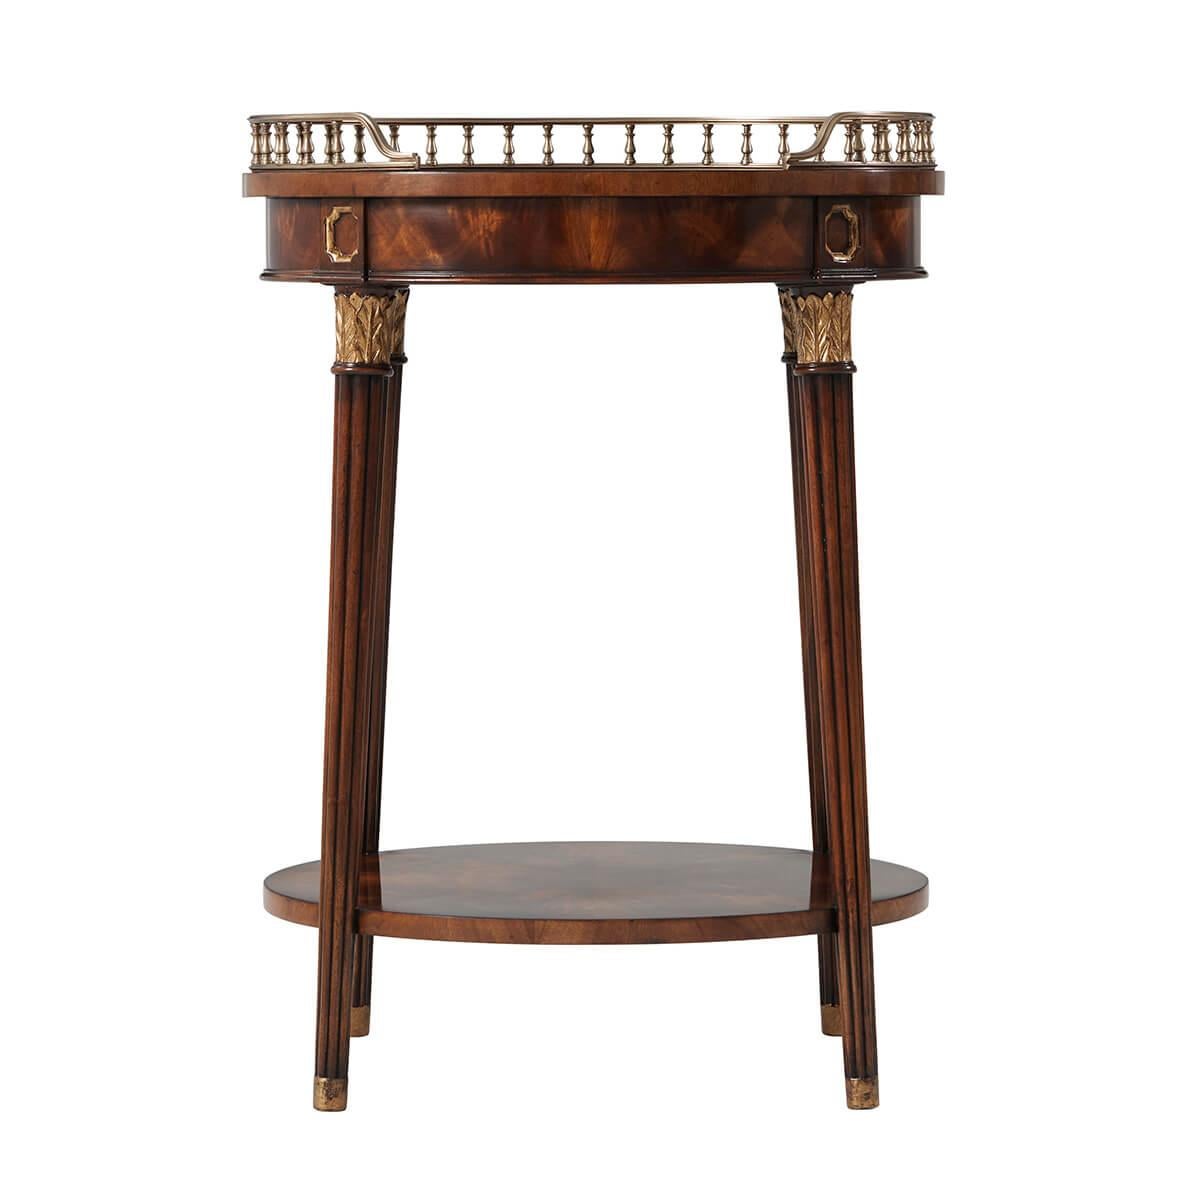 George III style figured veneer and mahogany side table. With an oval top with a fine three-quarter brass gallery, on splayed, gilt leaf capital, on reeded legs joined by a lower shelf stretcher.

Dimensions: 22